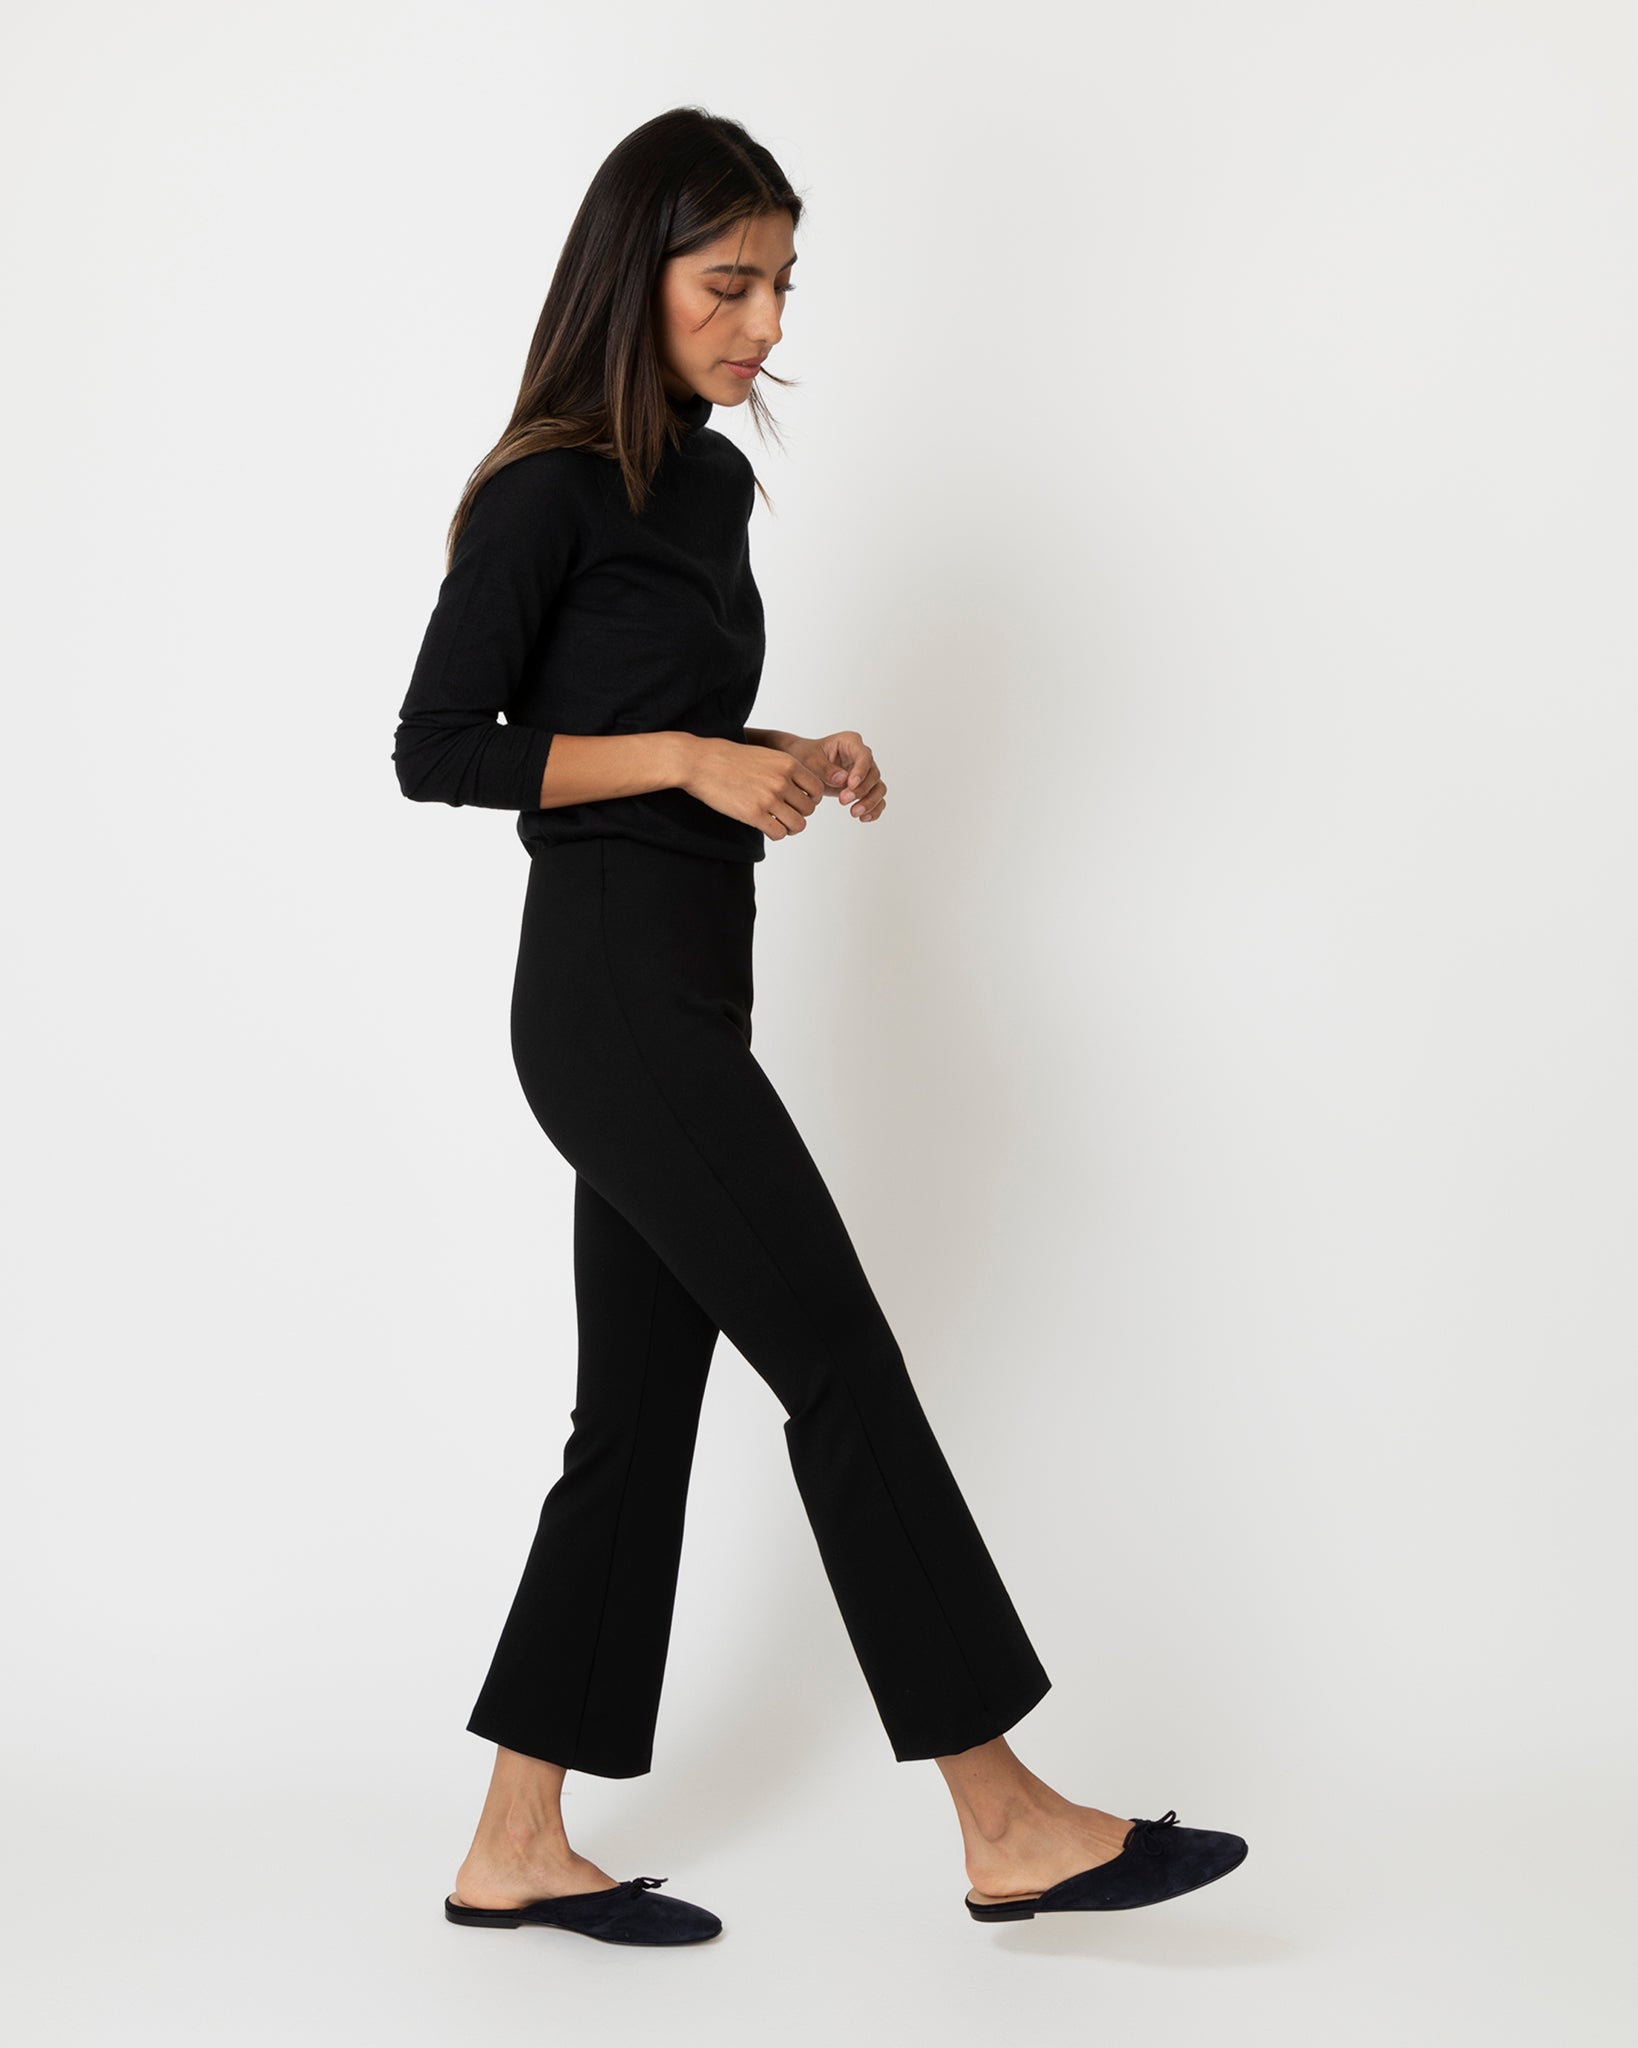 Faye Flare Cropped Pant in Black Ponte Knit